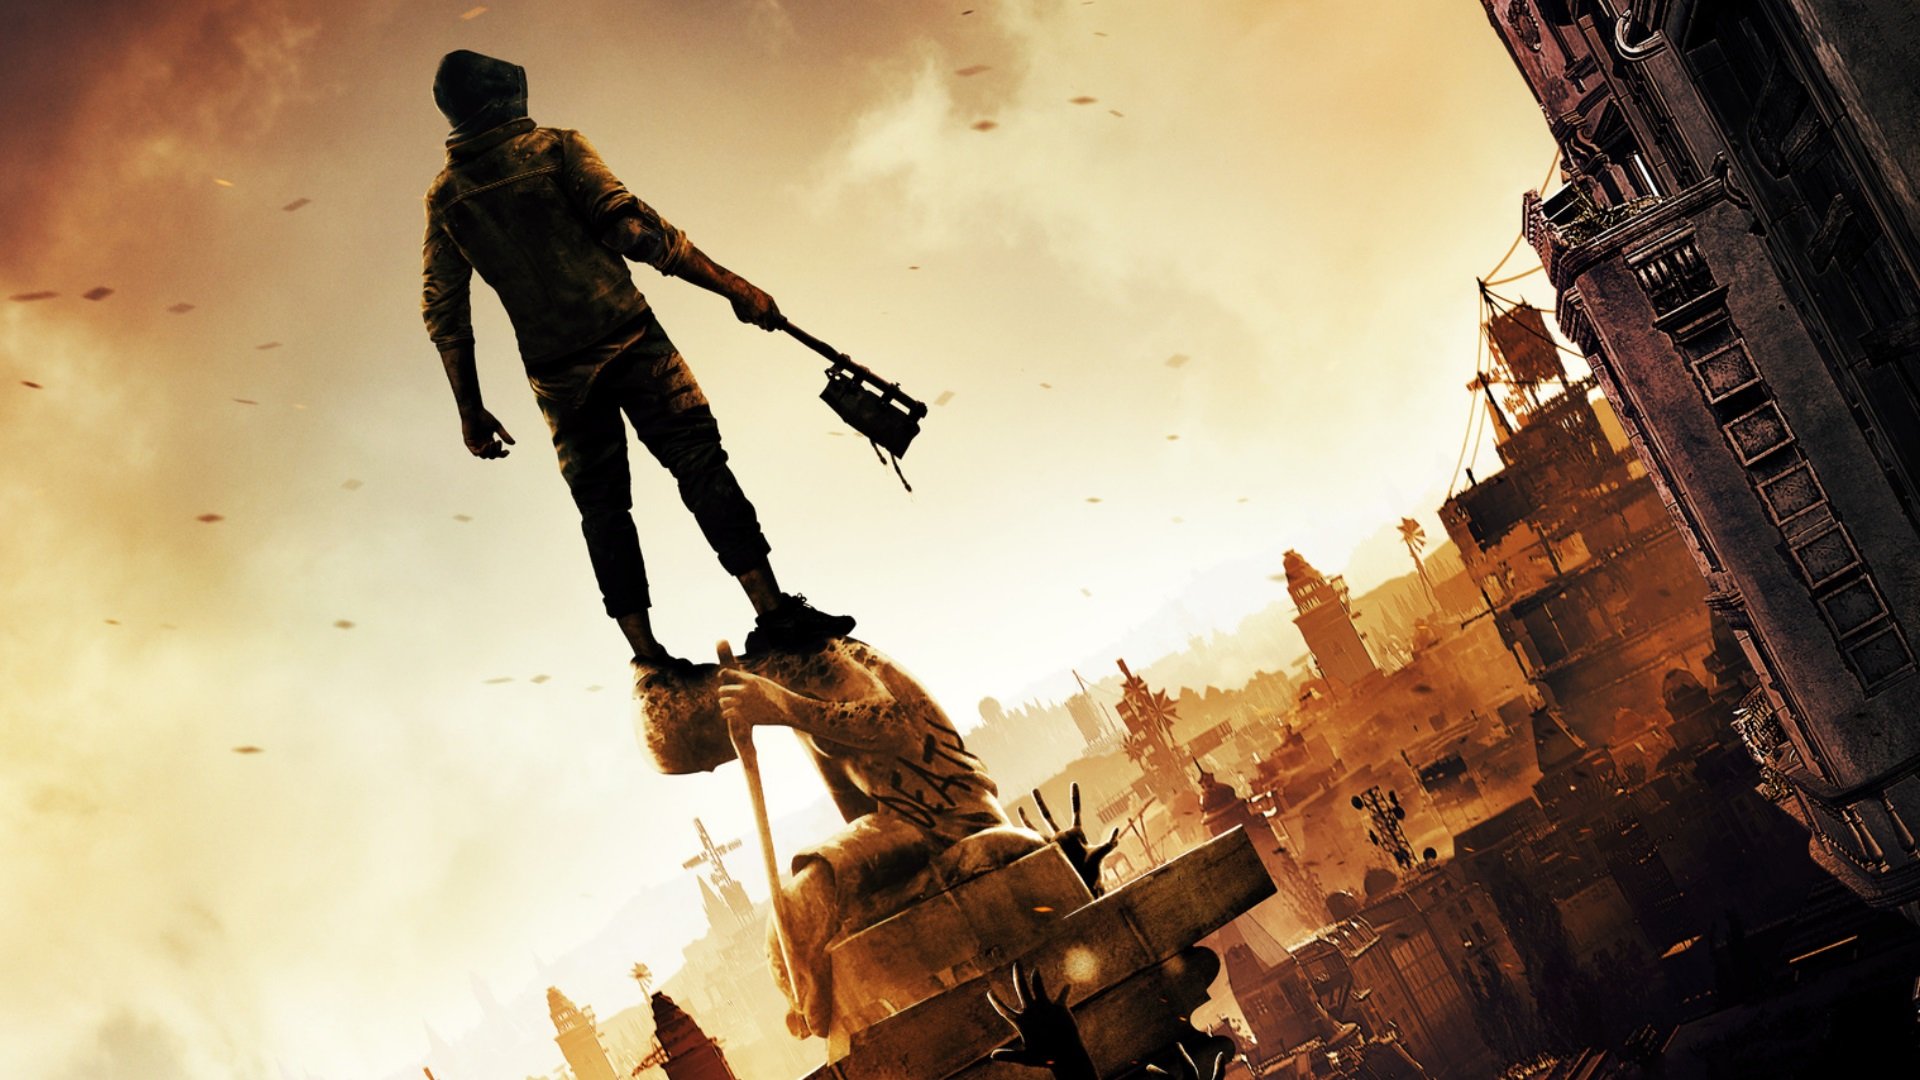 dying light 2 release date delayed